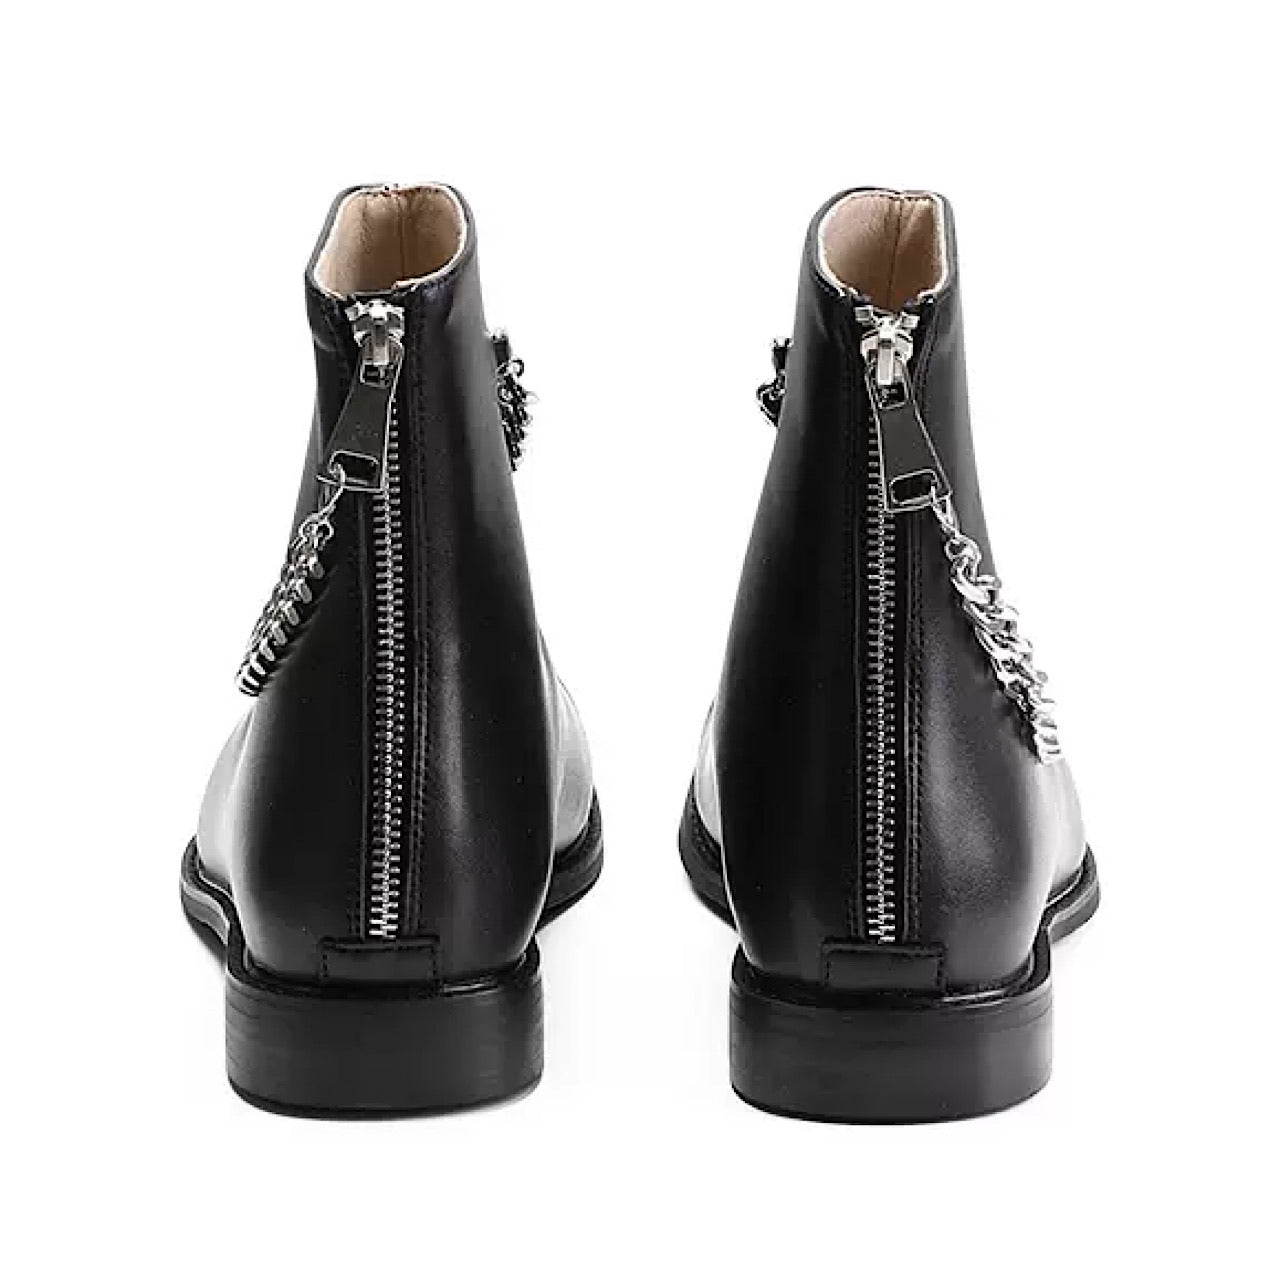 Chain round leather boots  HL1791